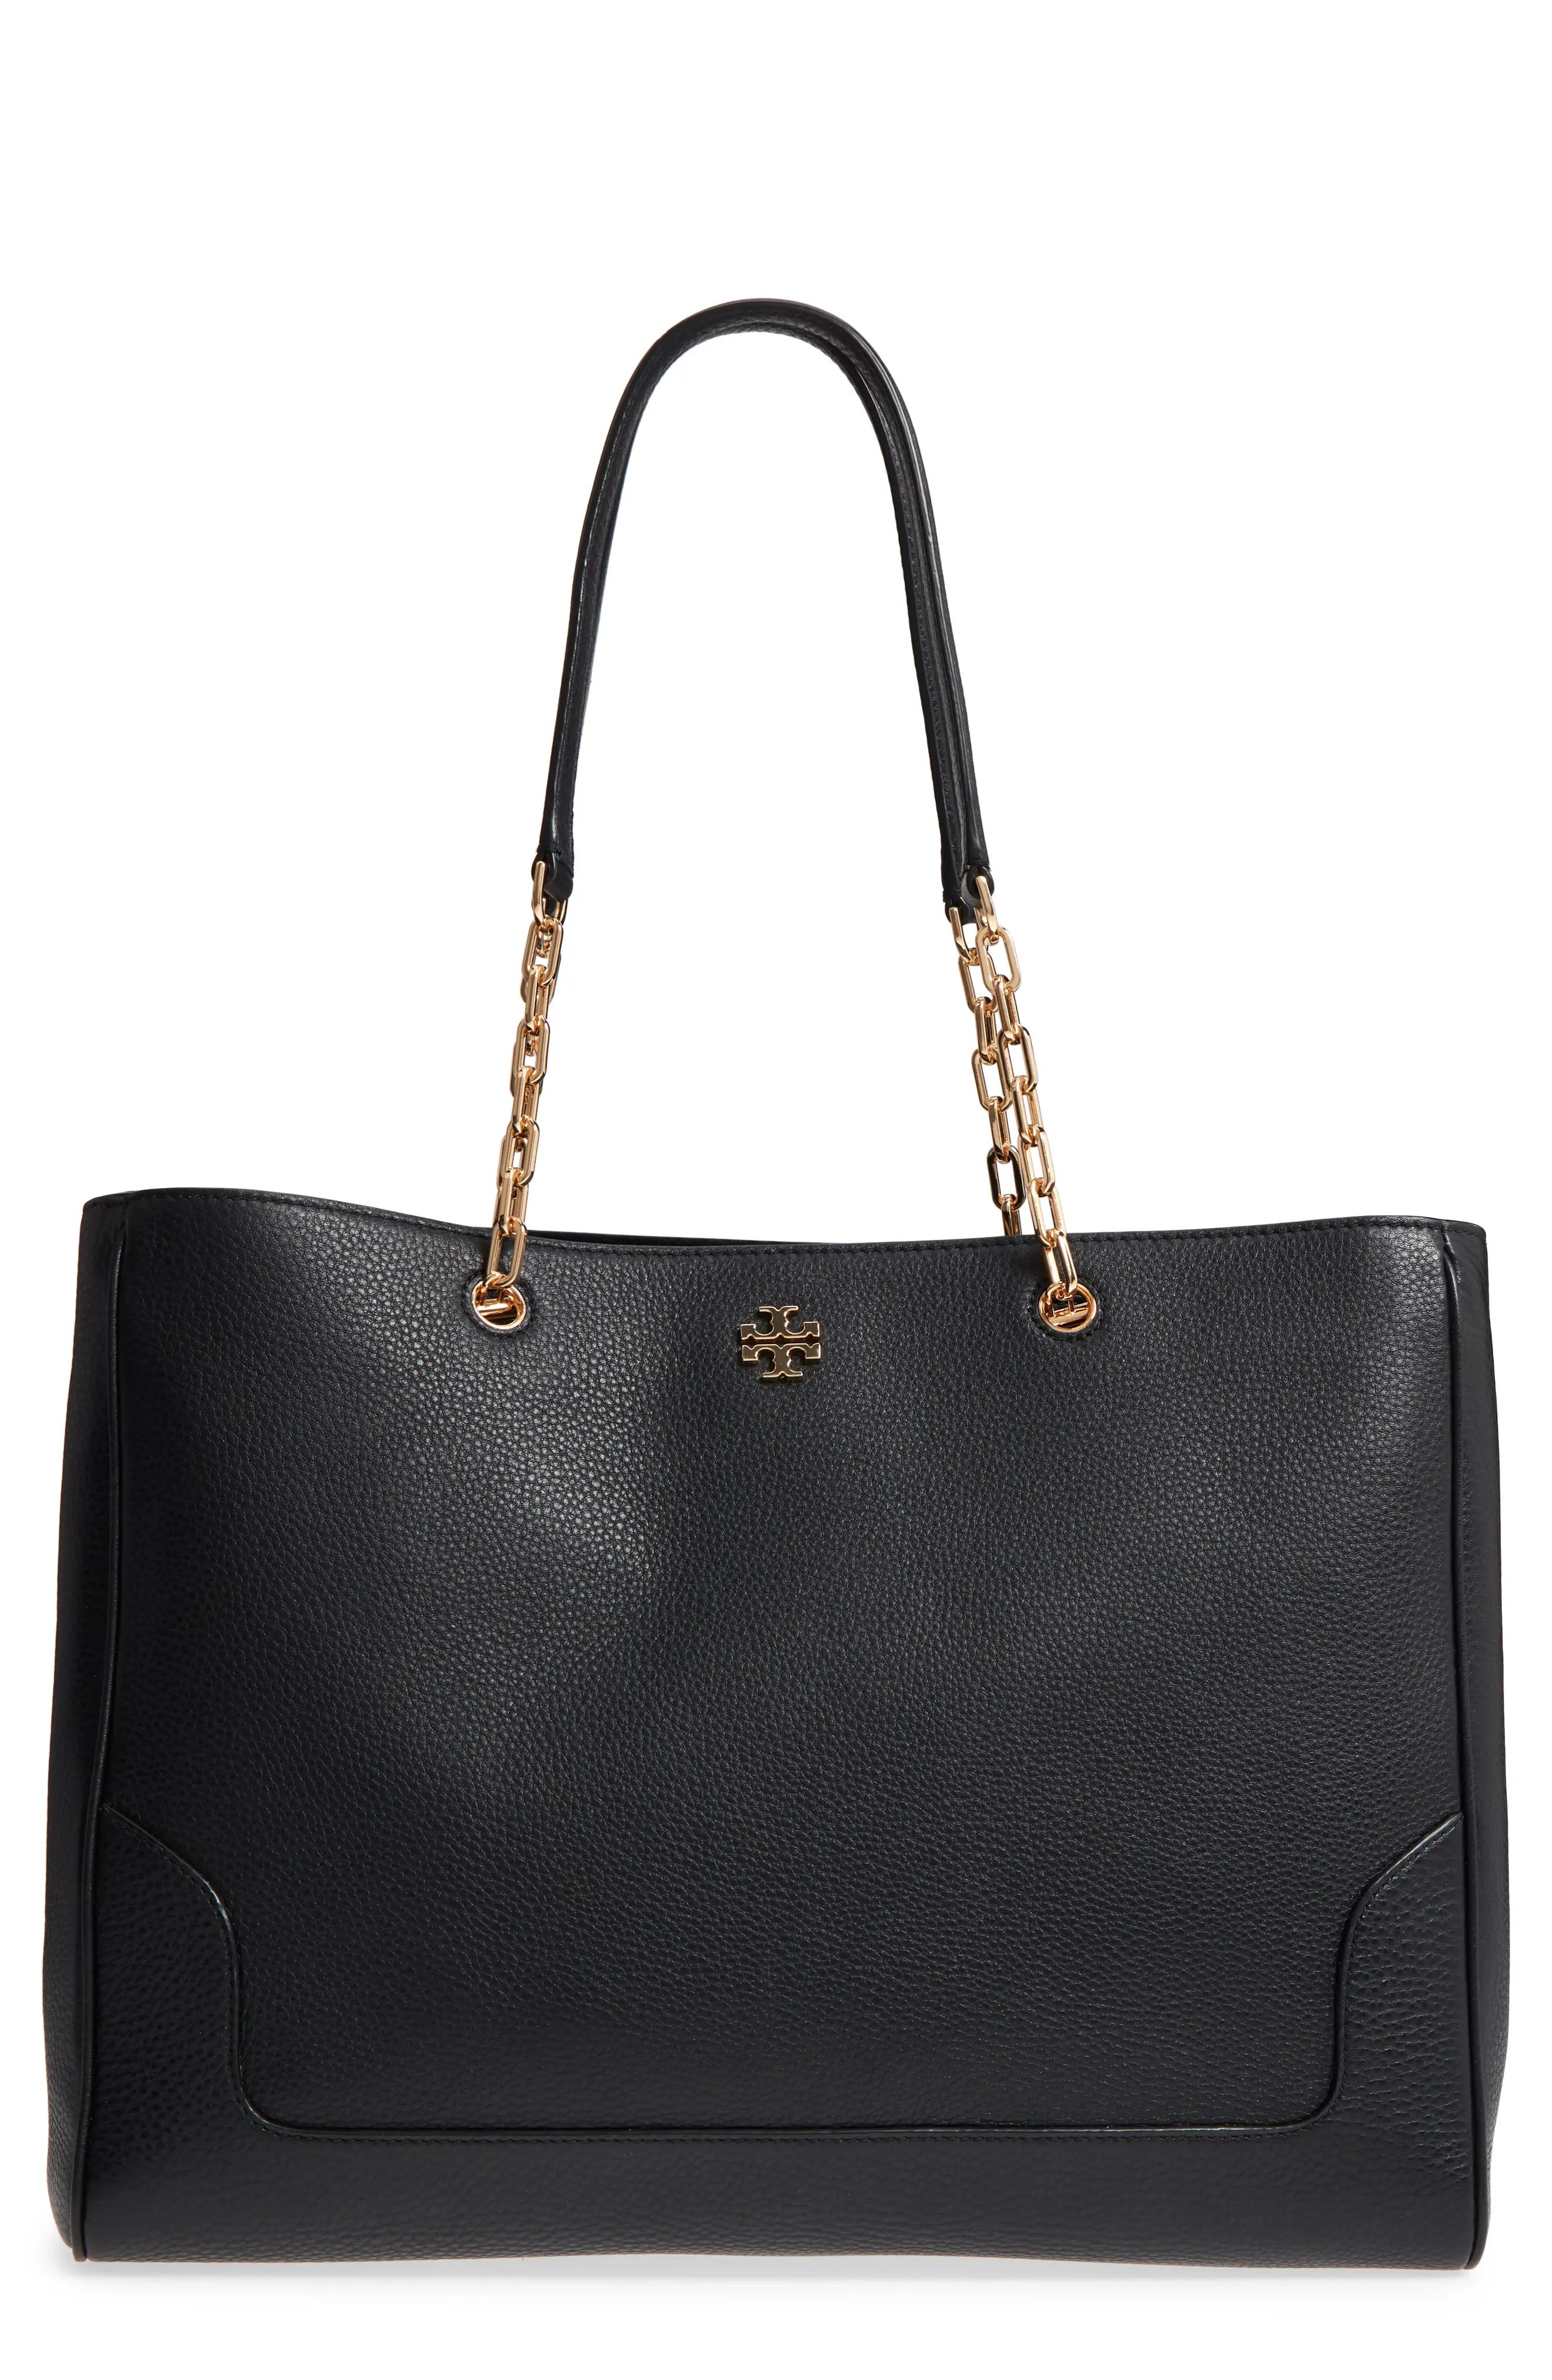 Tory Burch Marsden Pebbled Leather Tote | Nordstrom